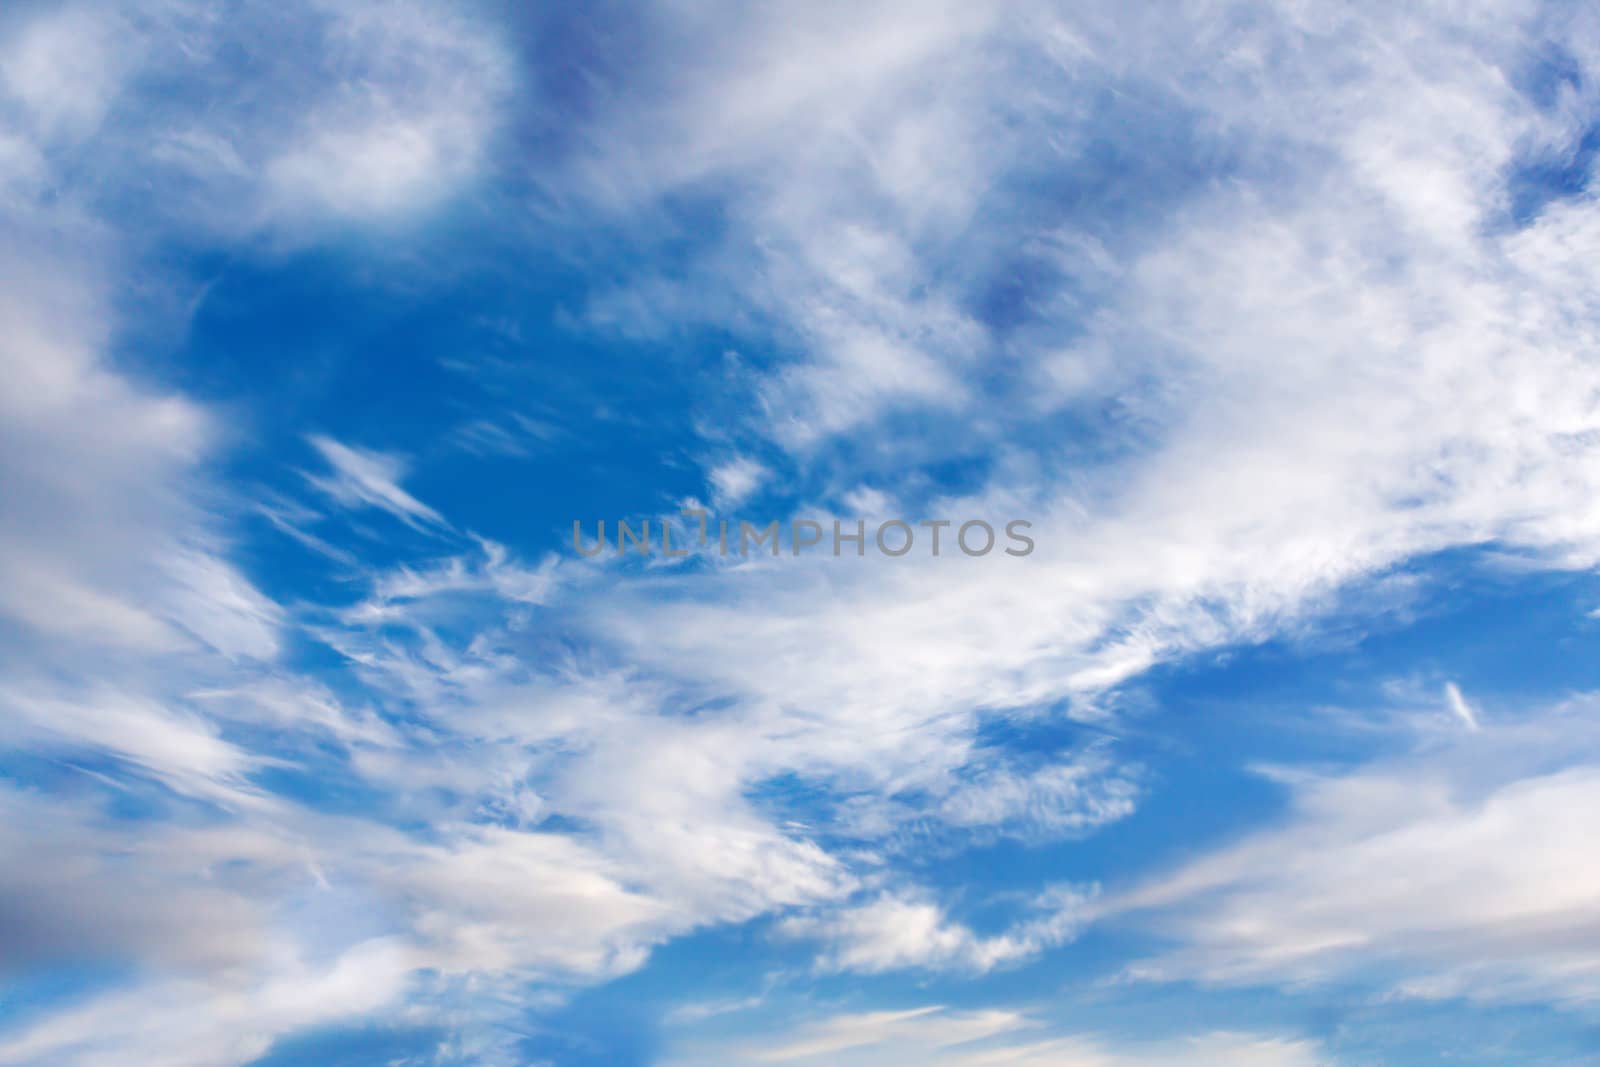 Background of Clouds and blue sky by Coffee999